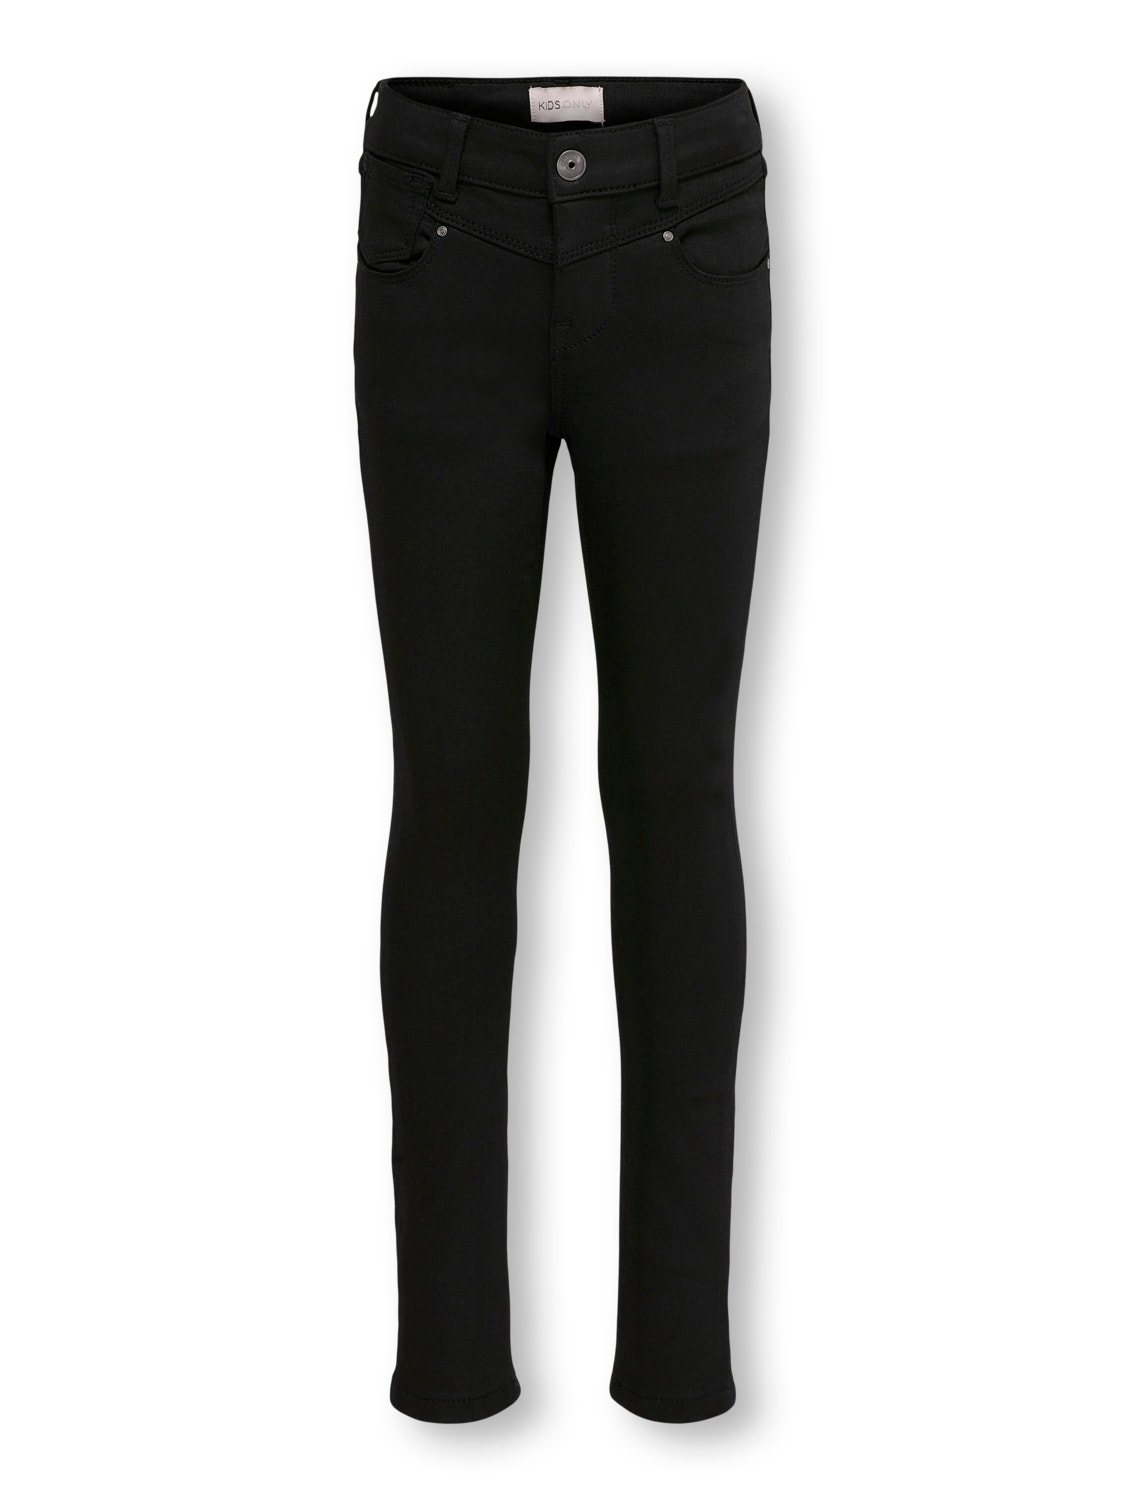 ONLY Skinny Fit Jeans -Black - 15249955